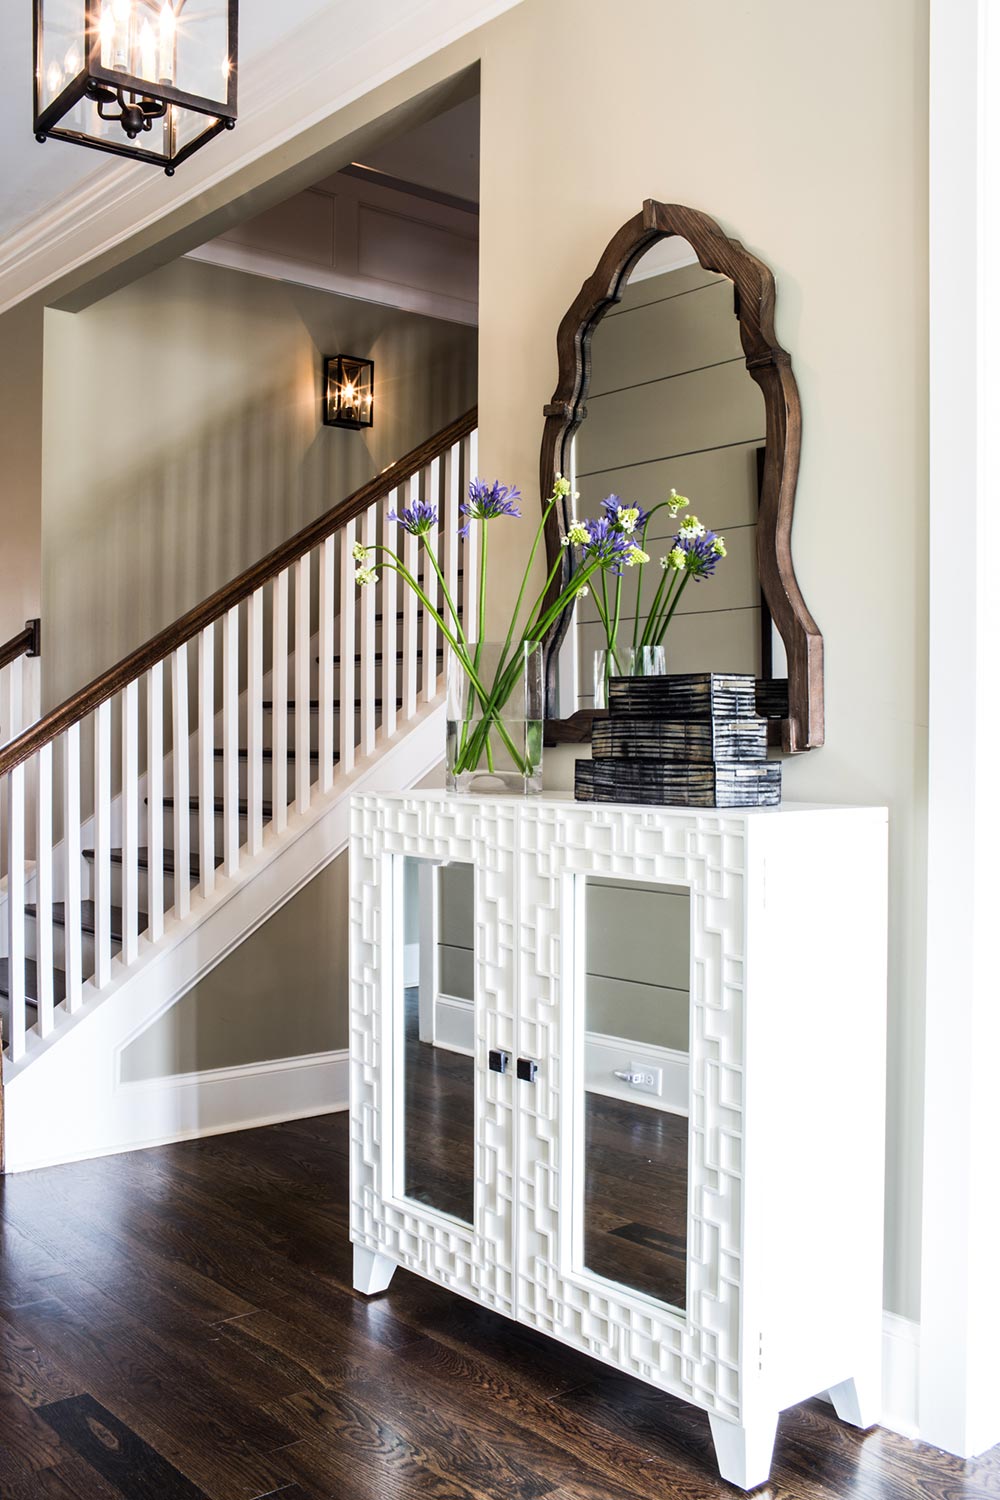 White entryway table with decorative mirror.